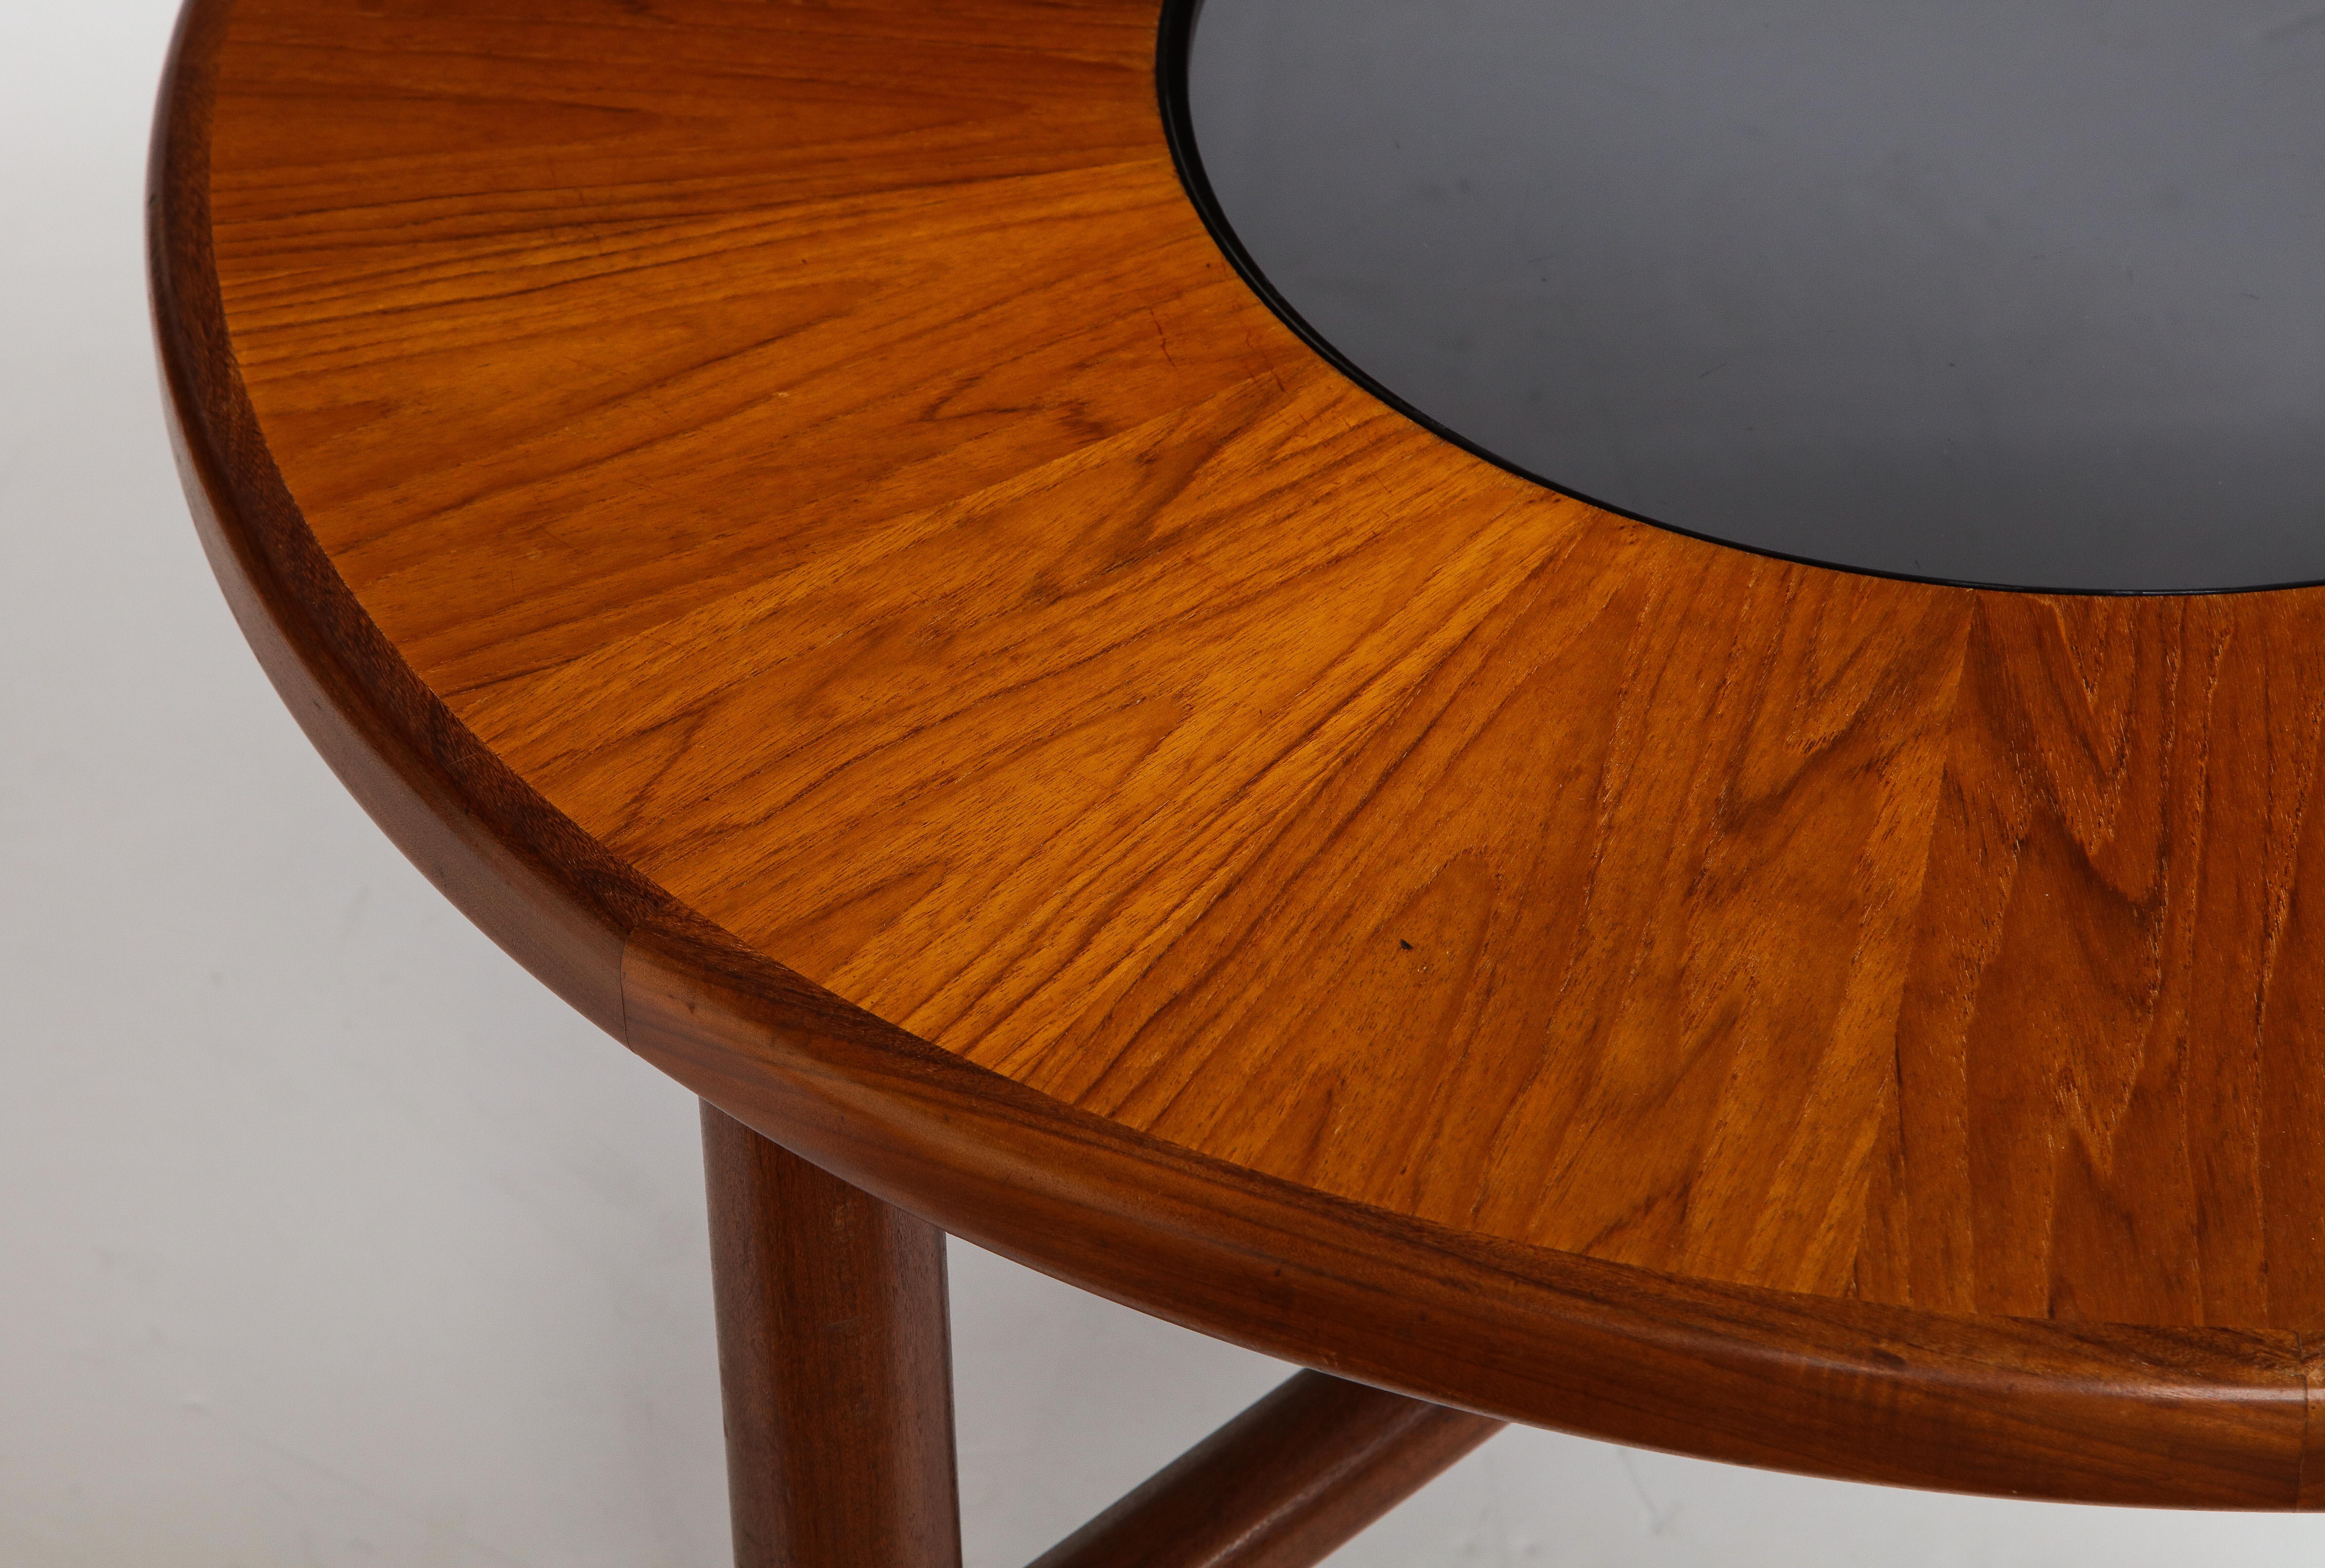 Midcentury Round Teak and Smoked Glass Coffee Table by G-Plan, U.K. 1960s In Good Condition For Sale In Chicago, IL